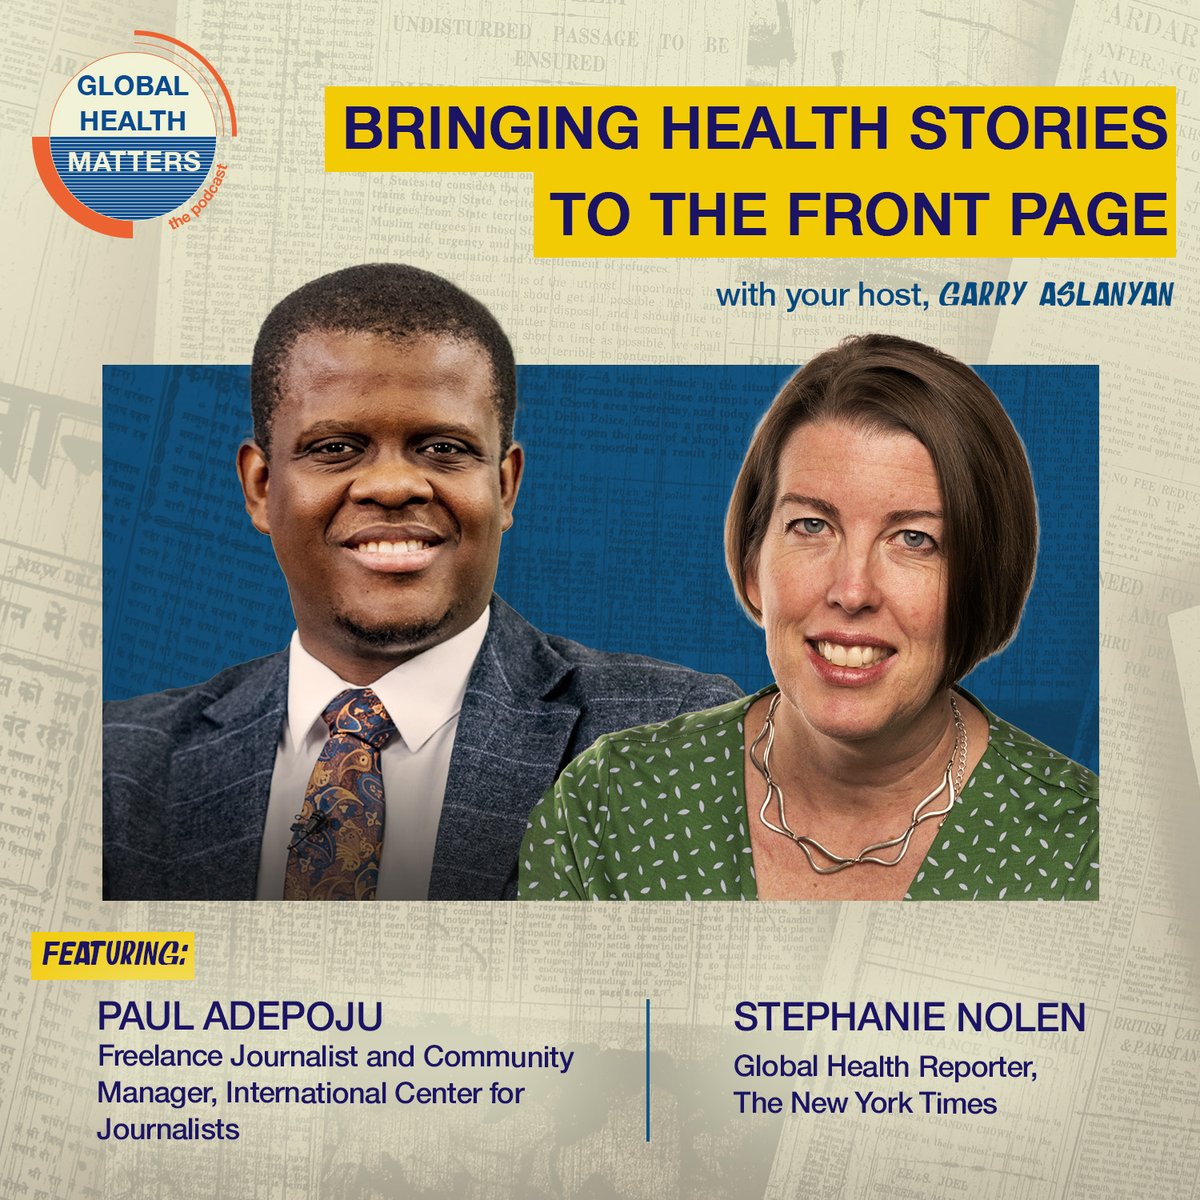 ICYMI - #WorldHealthDay today! Celebrate by tuning in to my conversation with @pauladepoju & @snolen The right of everyone, everywhere to have access to health information is key in how they bring health stories to the front page #MyHealthMyRight Tune in👉tinyurl.com/GHM-E34